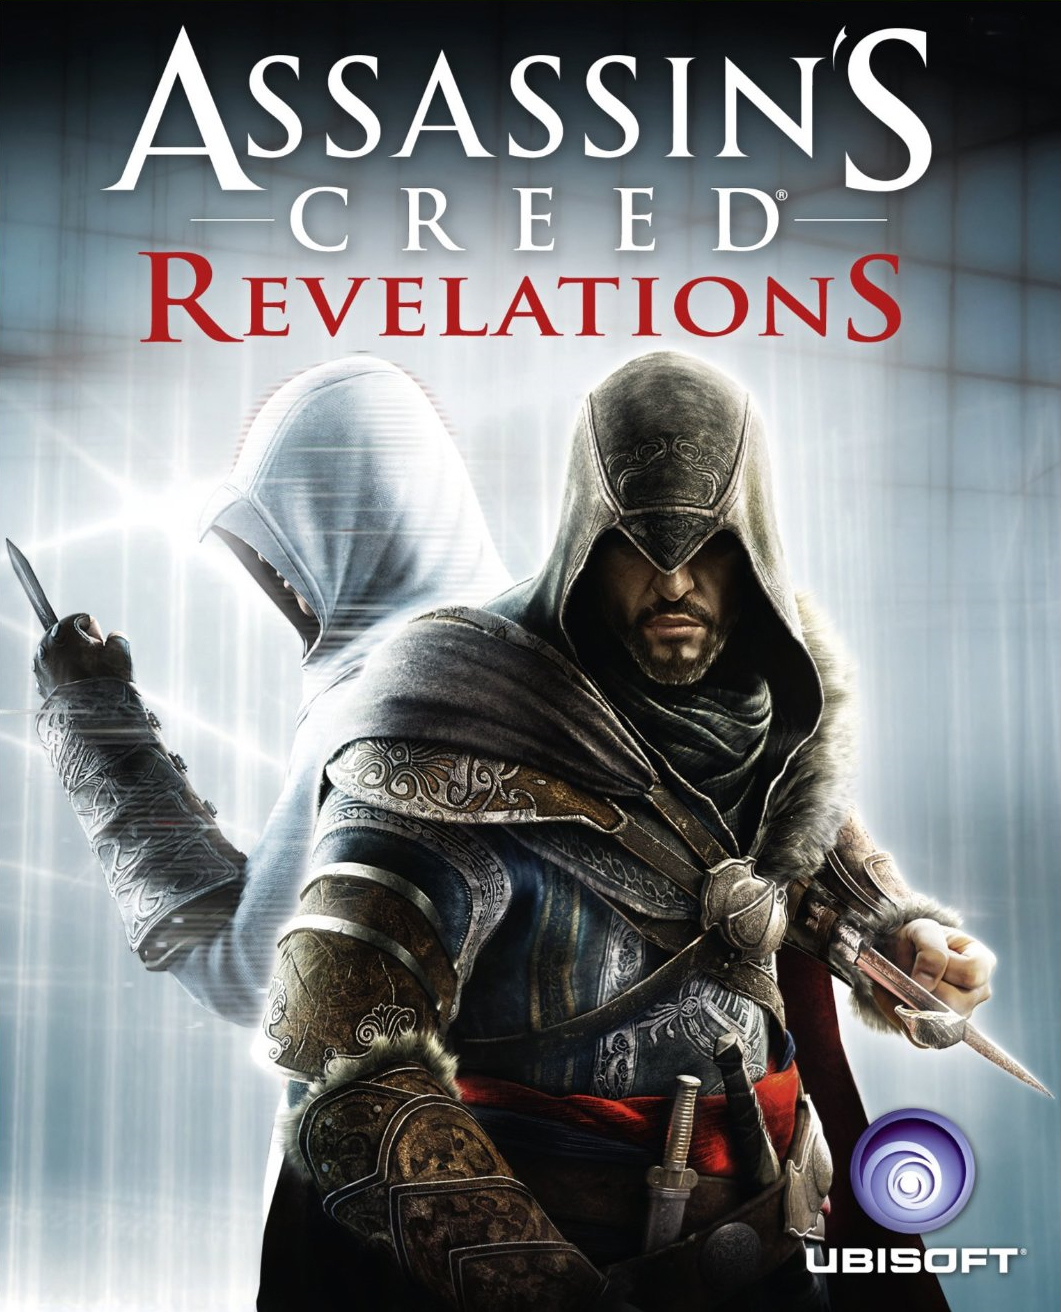 compressed-games-and-pc-hacking-tricks-assassin-s-creed-revelations